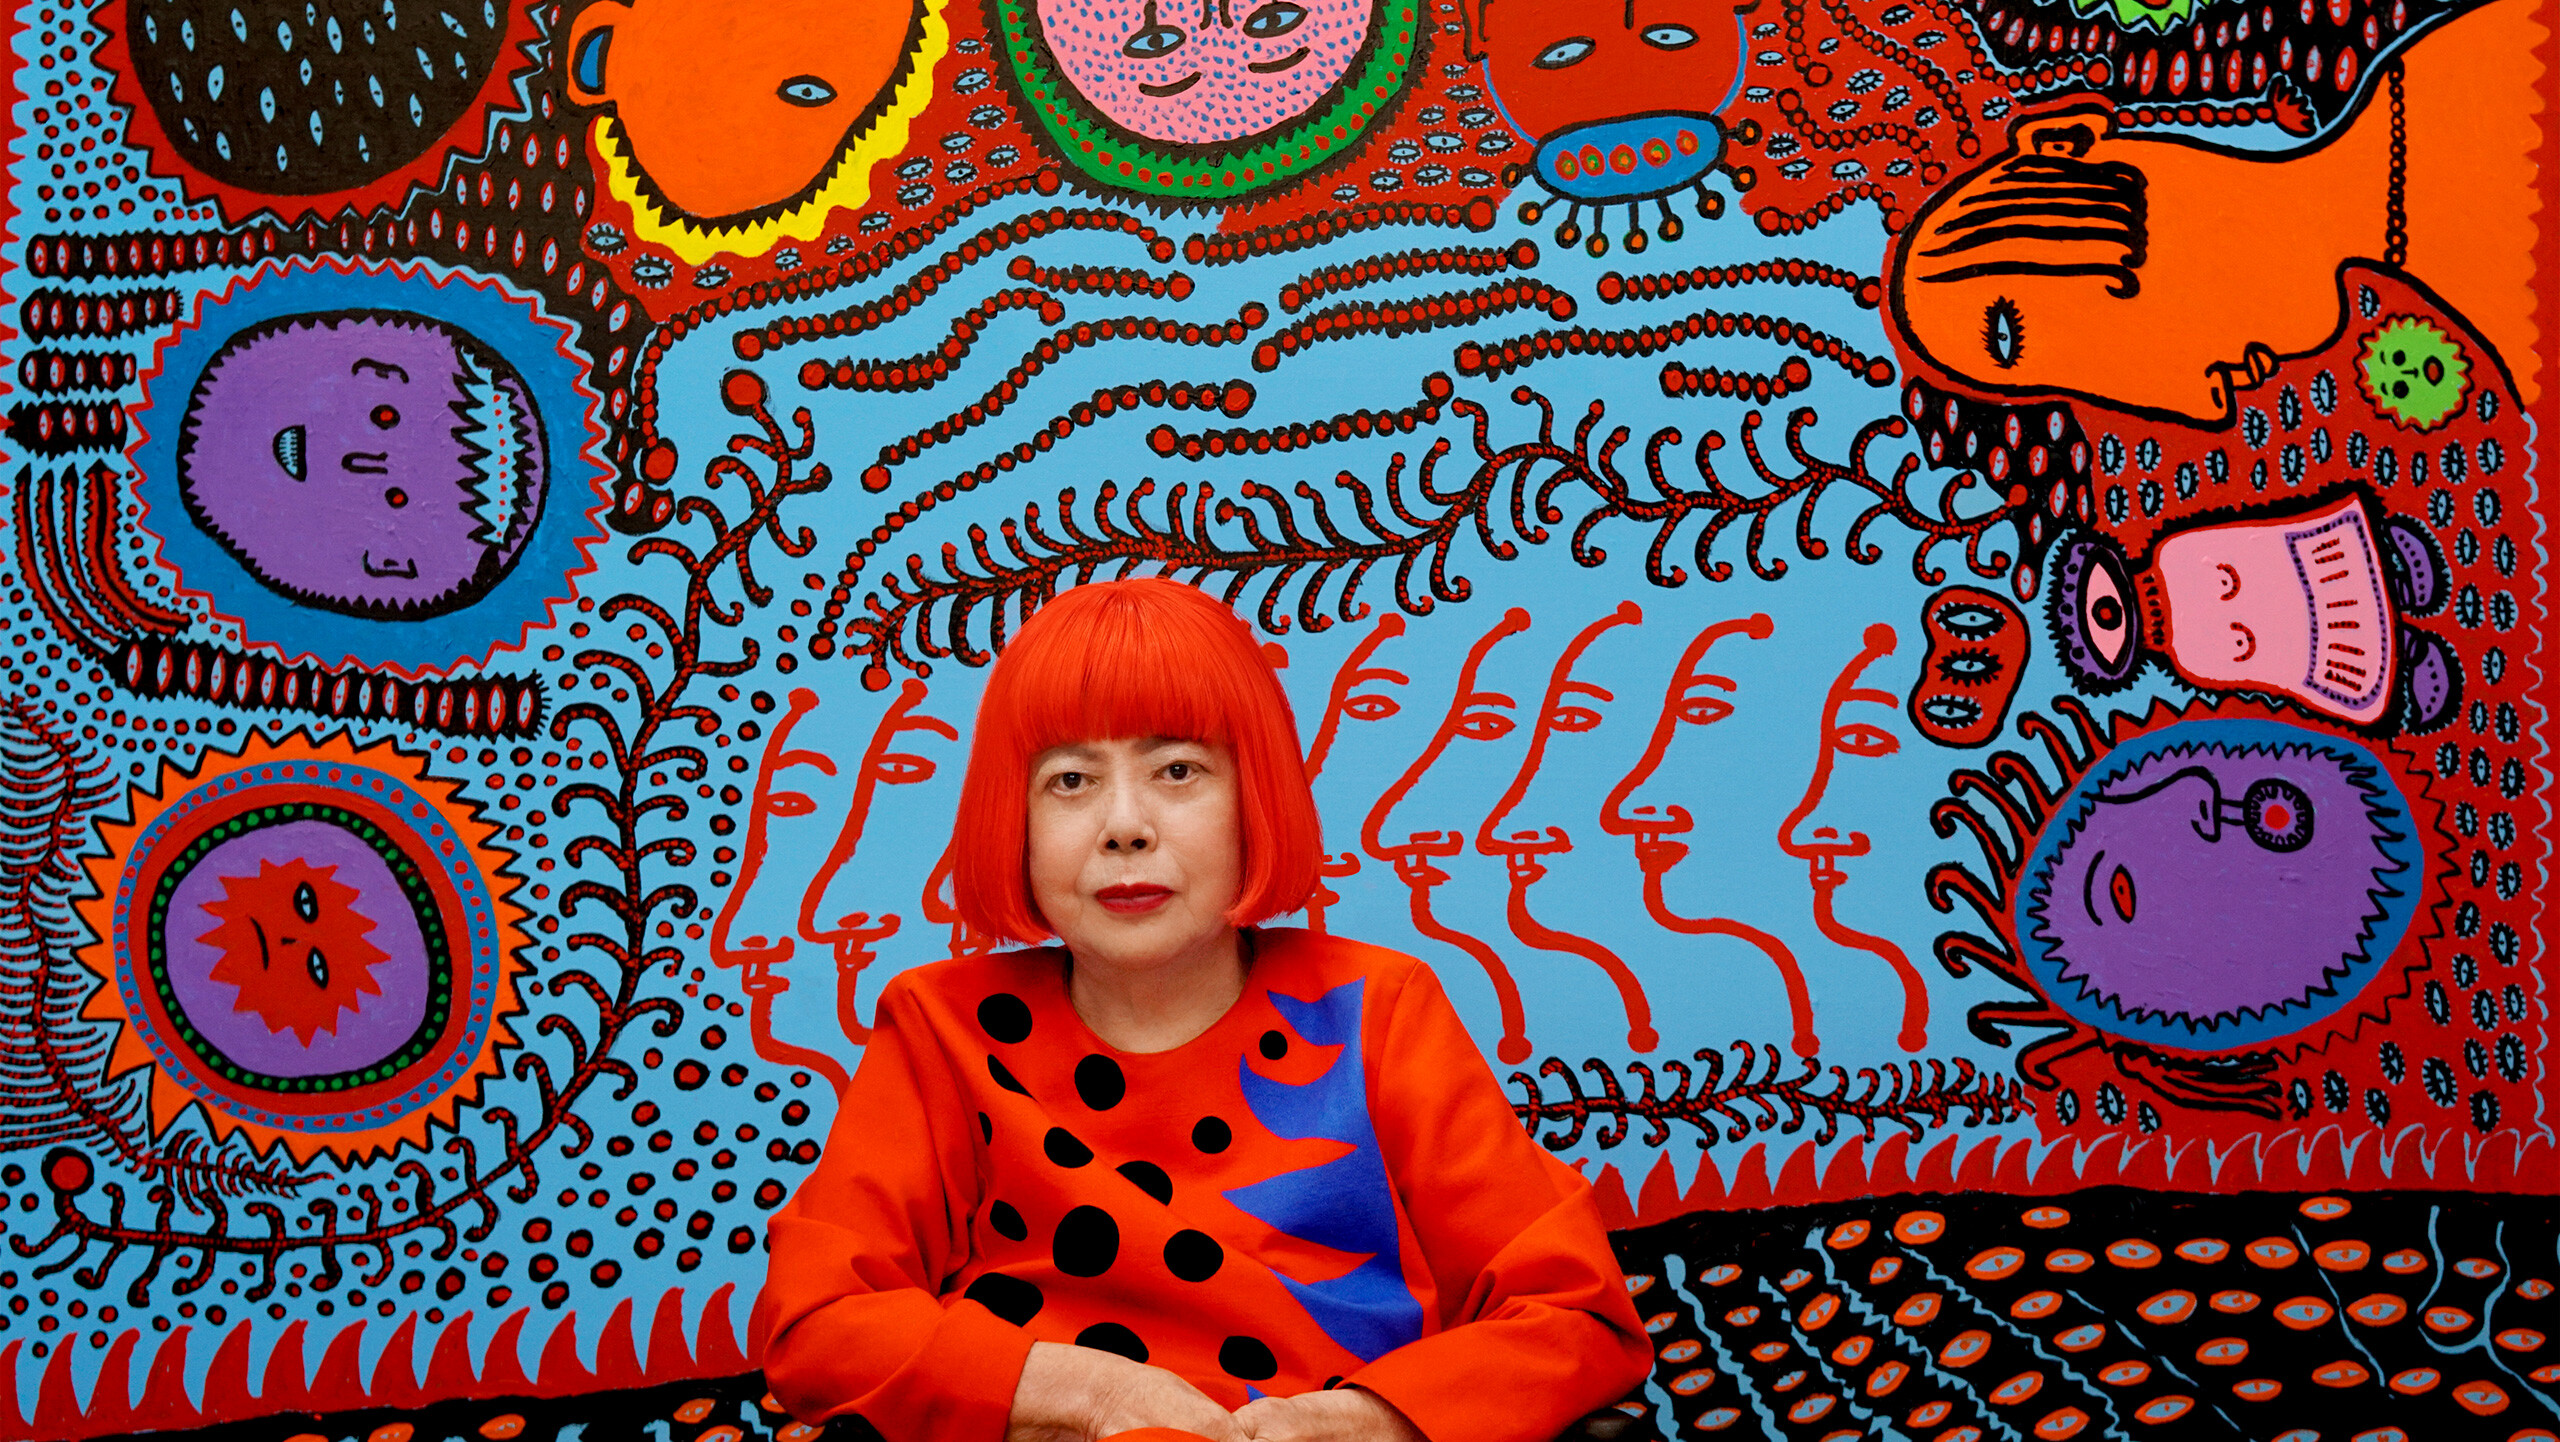 Yayoi Kusama, 'I Spend Each Day Embracing Flowers' at David Zwirner, 19th  Street, New York, United States on 11 May–21 Jul 2023